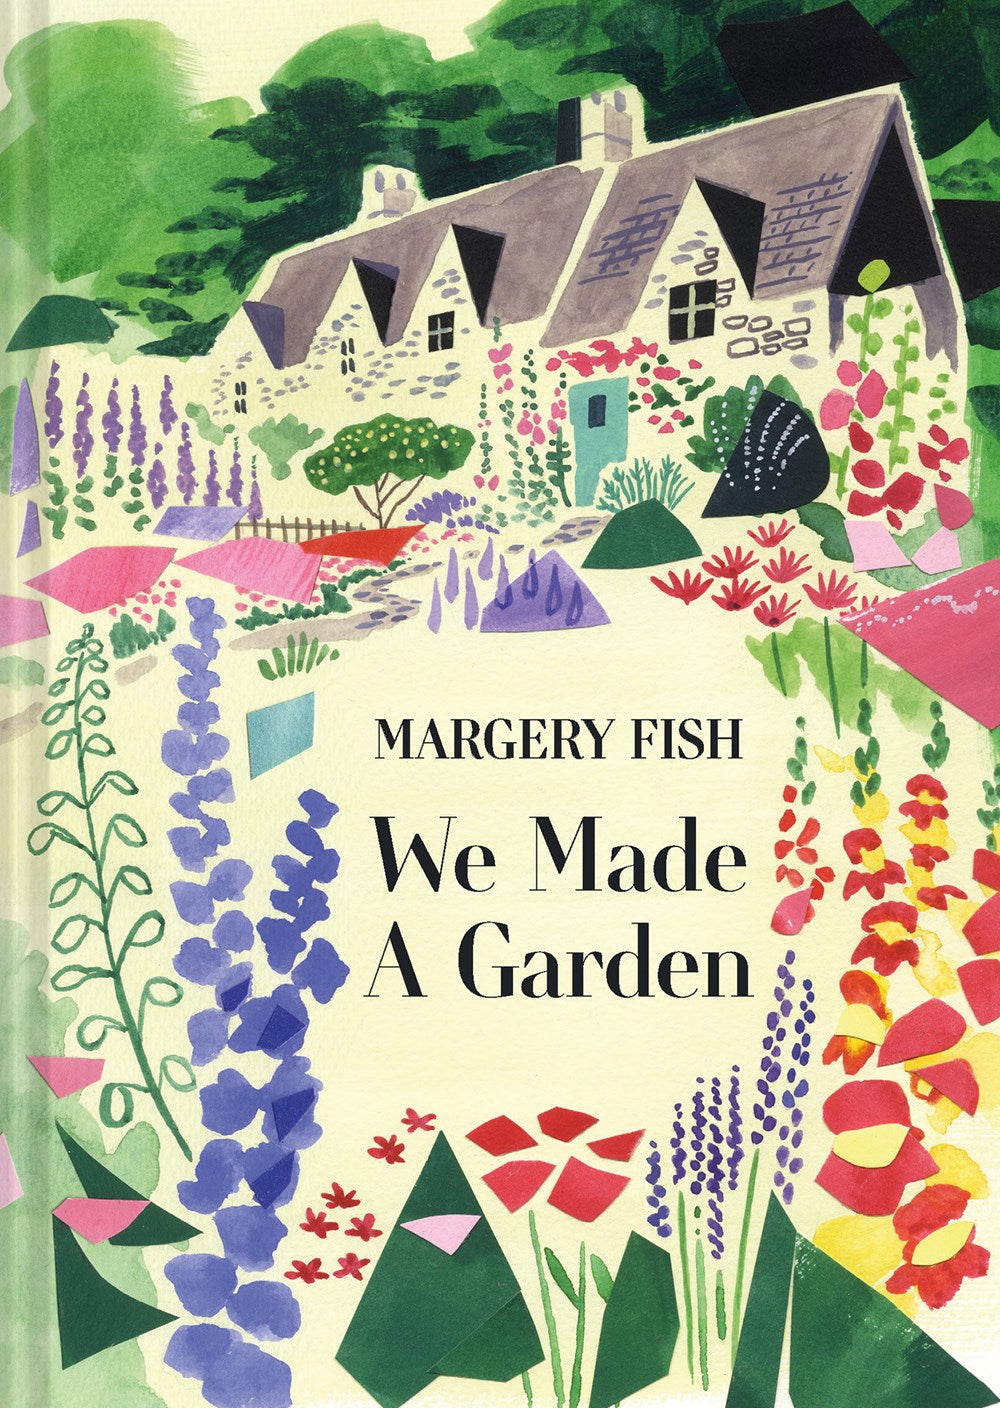 We Made A Garden by Margery Fish (6/11/24)